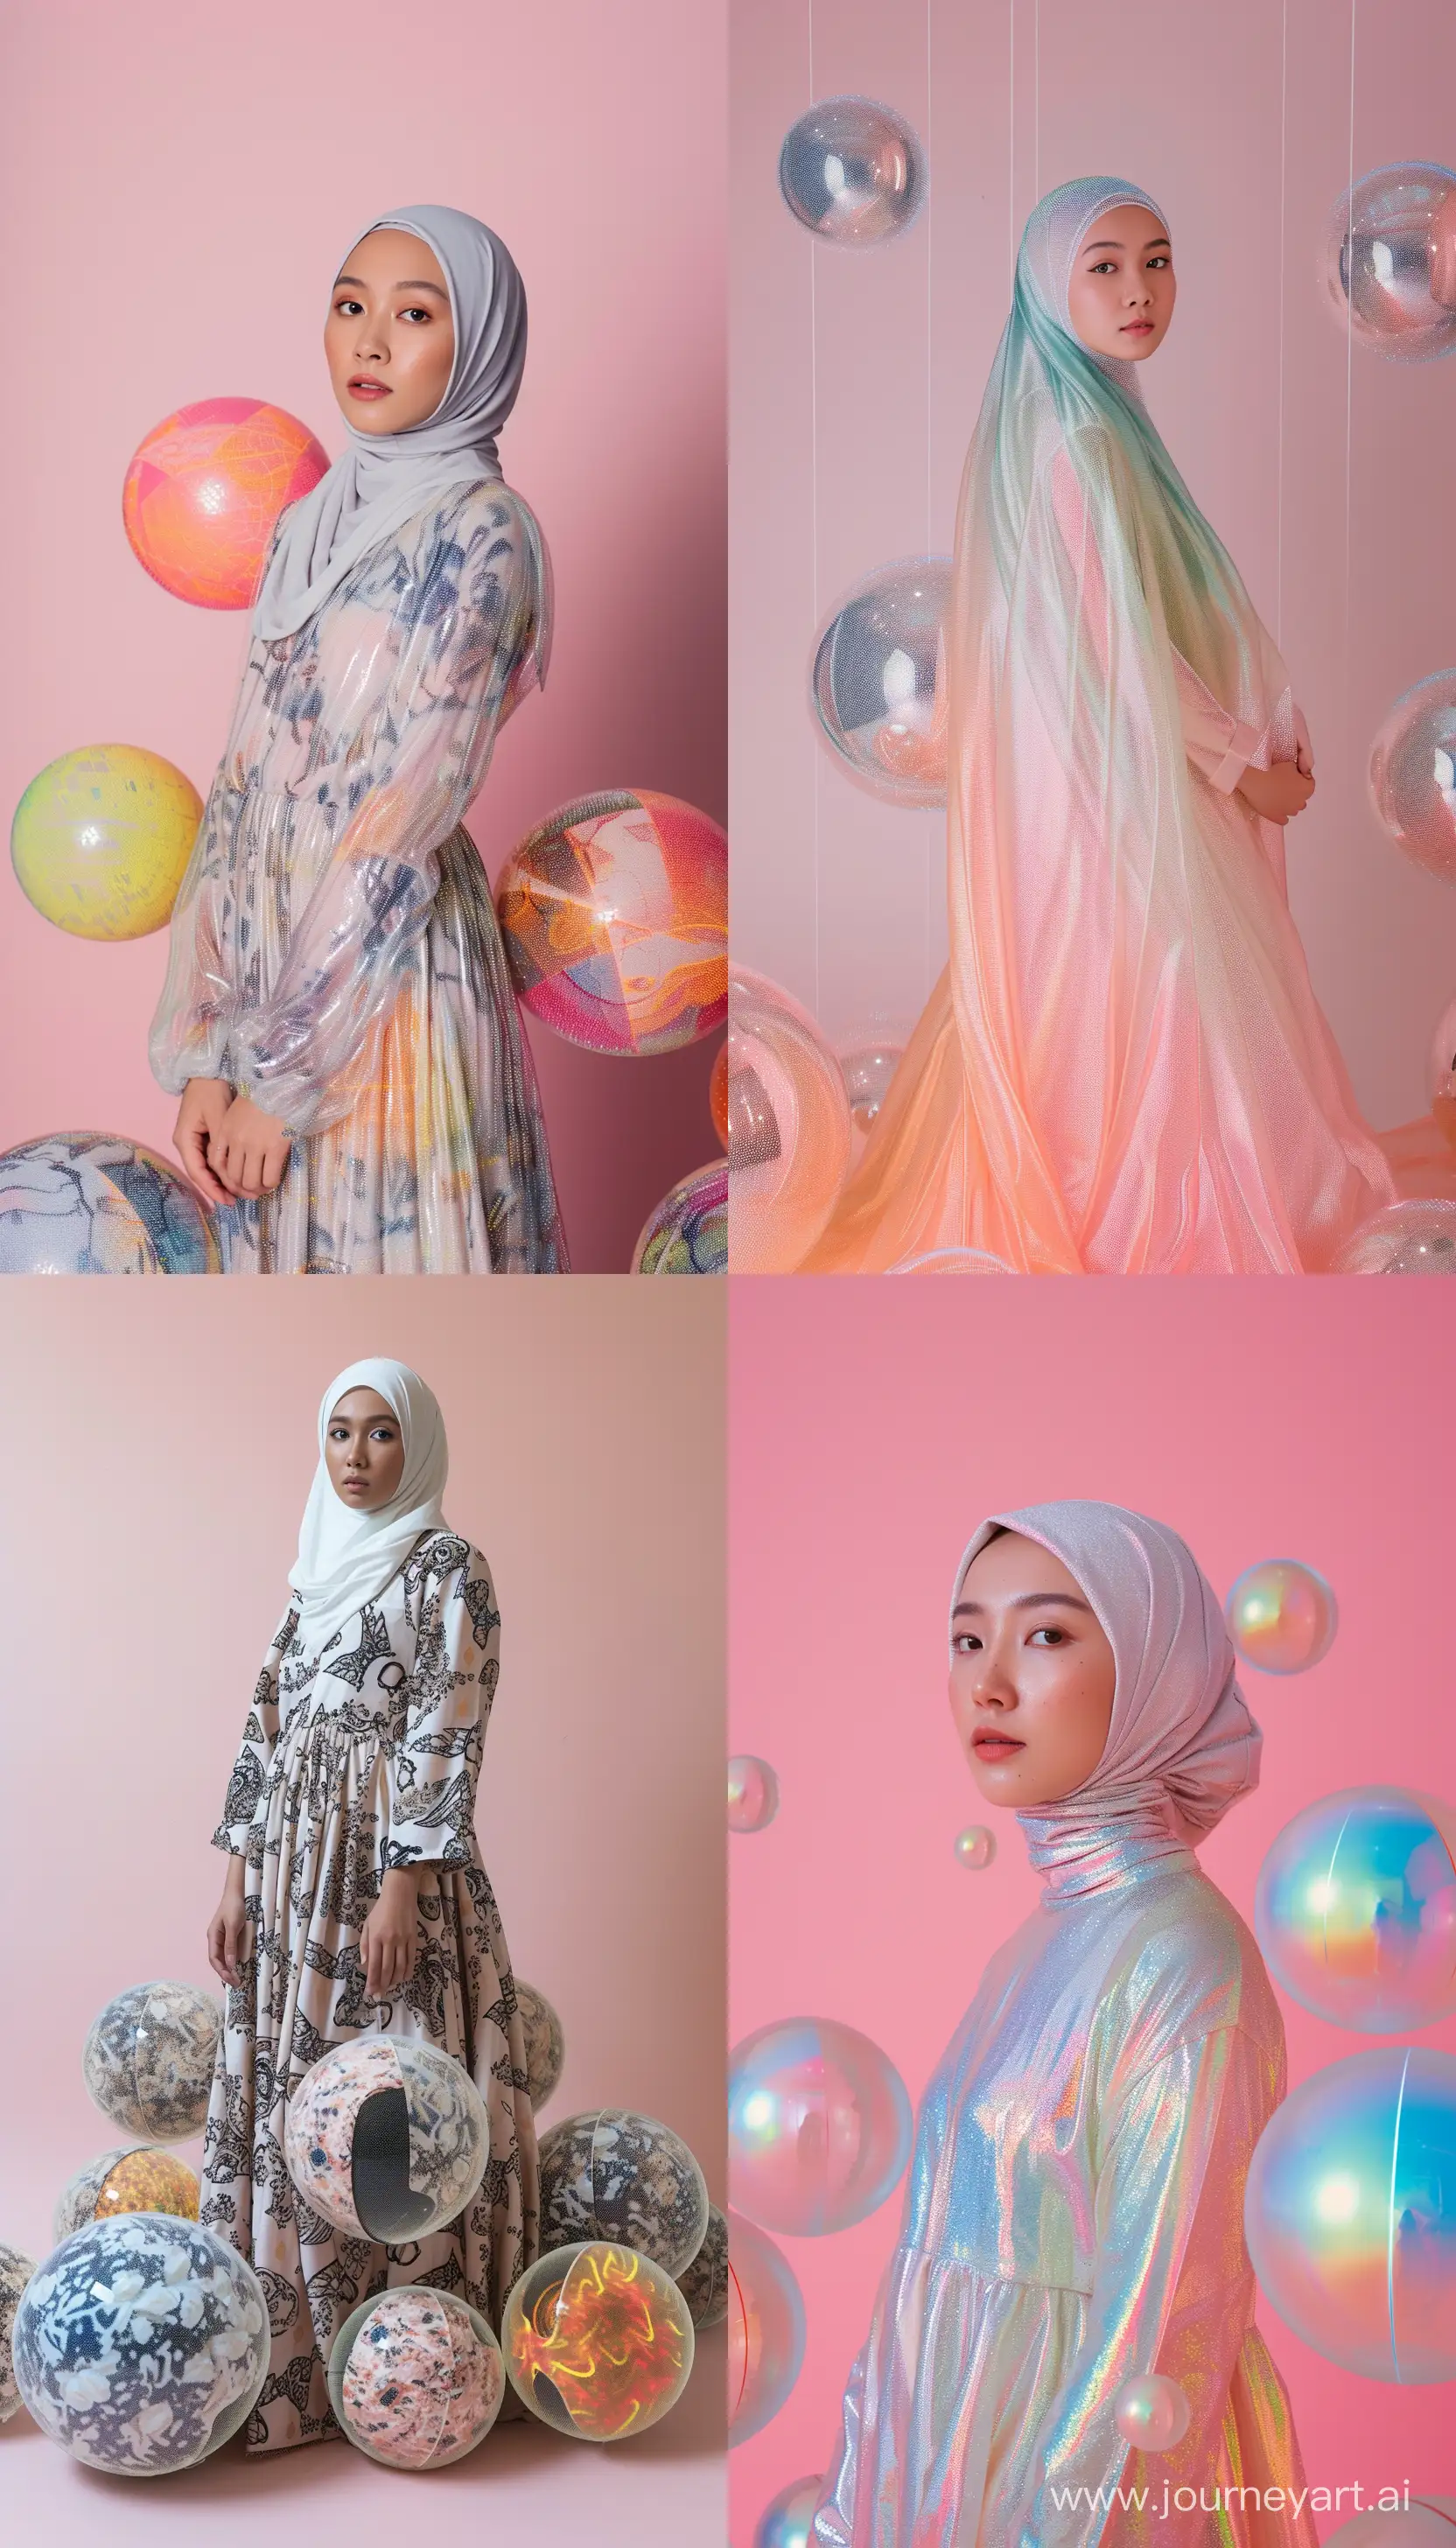 Fashion-Forward-Stylish-Indonesian-Woman-in-Hologram-Hijab-Dress-Amidst-Divided-Spheres